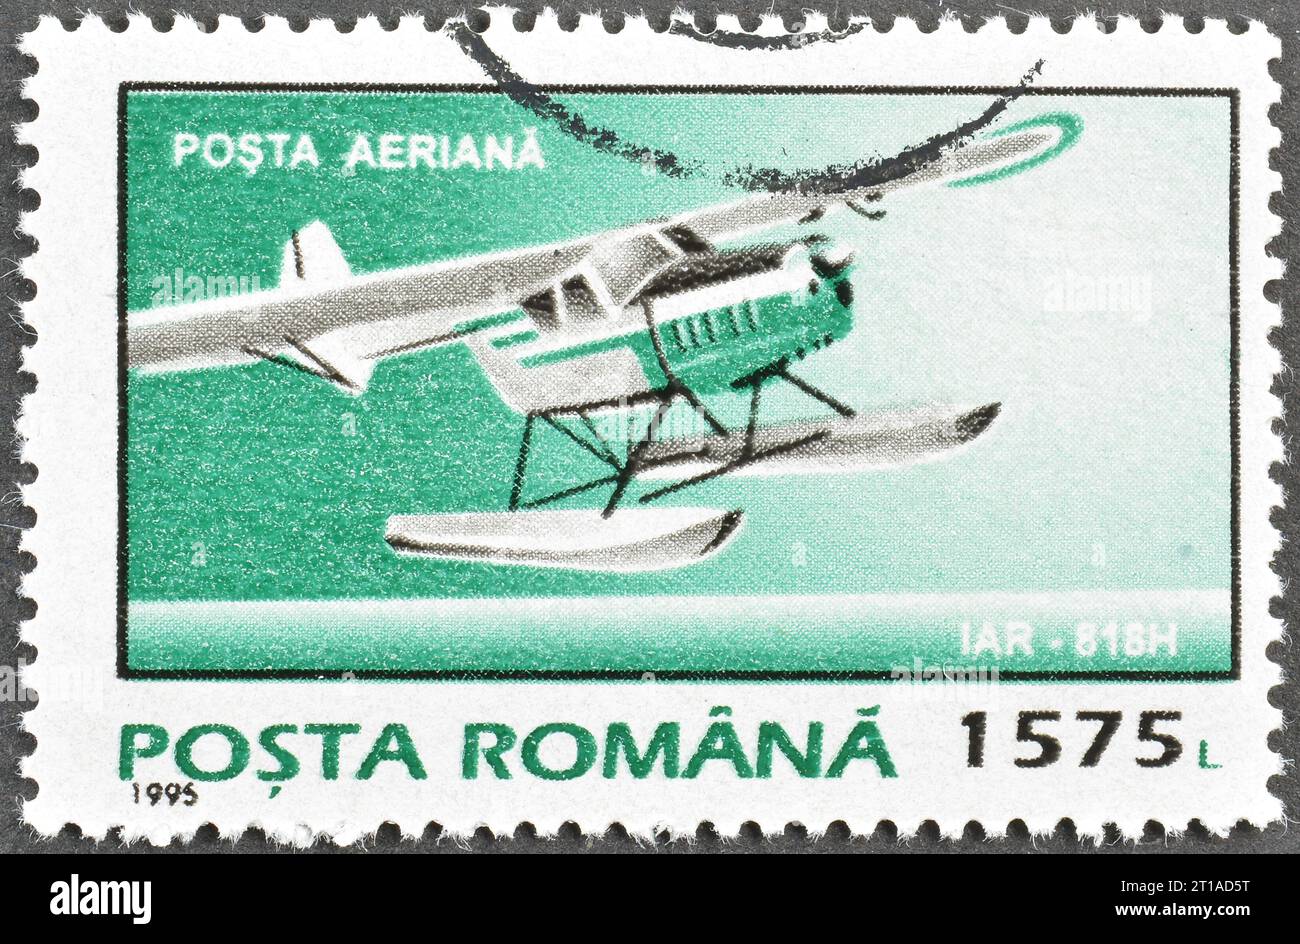 Cancelled postage stamp printed by Romania, that shows Seaplane IAR-818H, circa 1995. Stock Photo